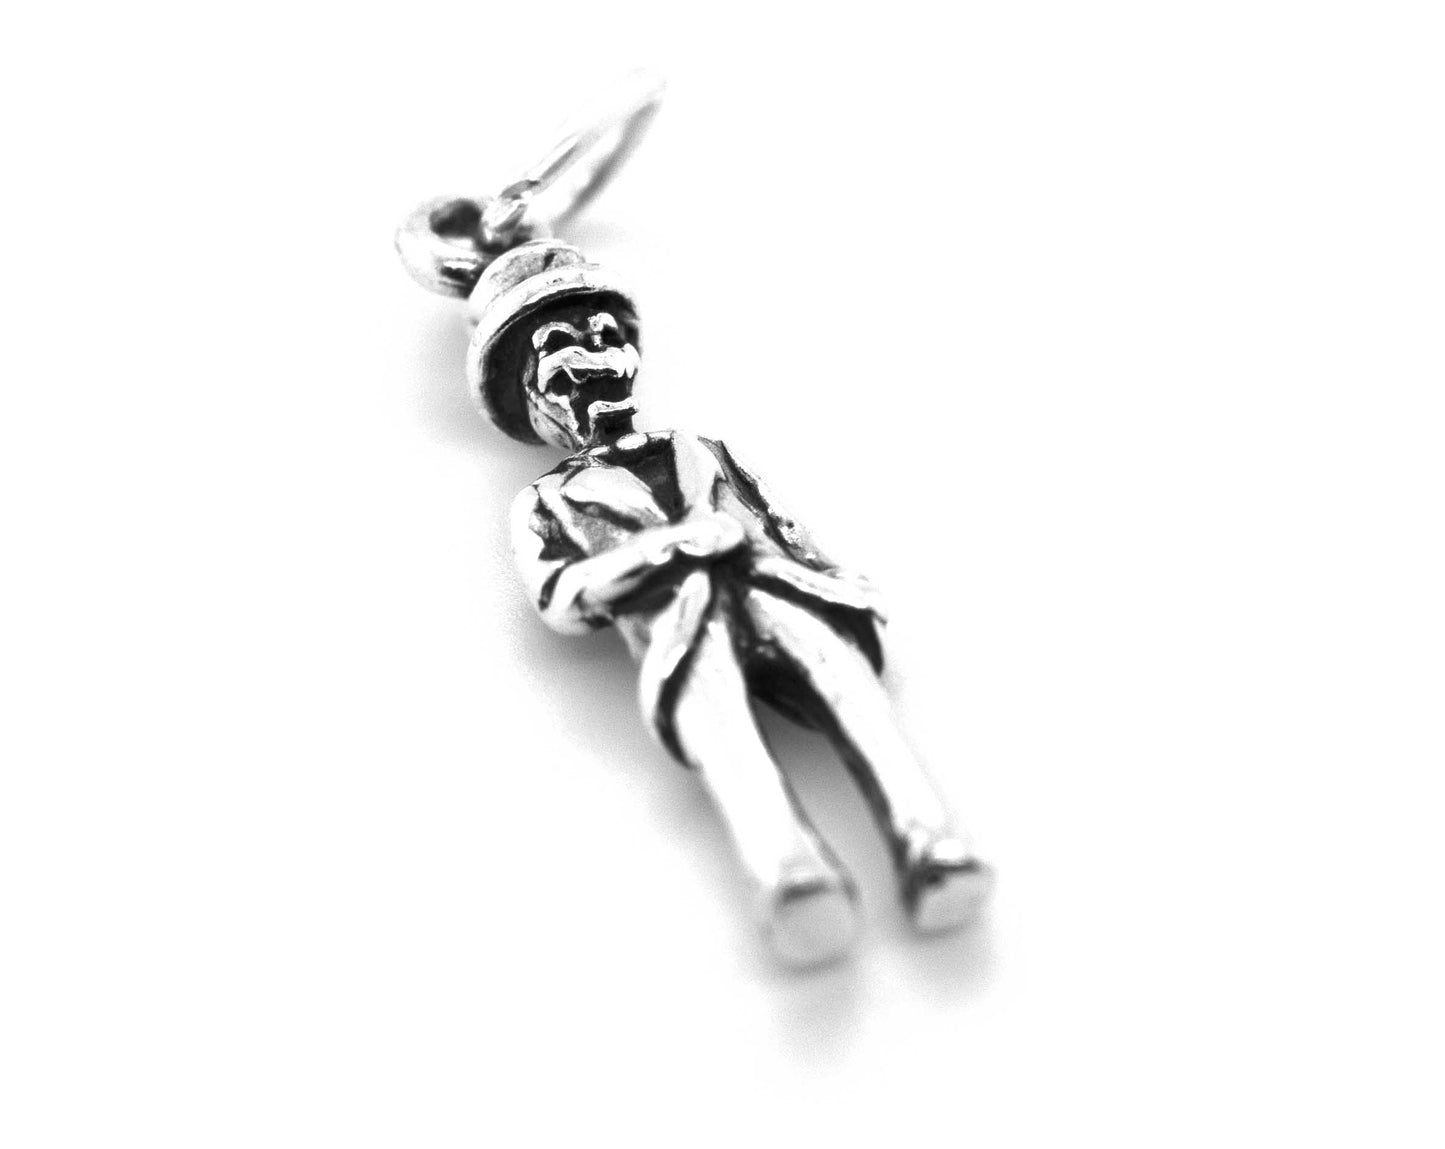 A Super Silver Skeleton Groom Charm, perfect for the Halloween season.